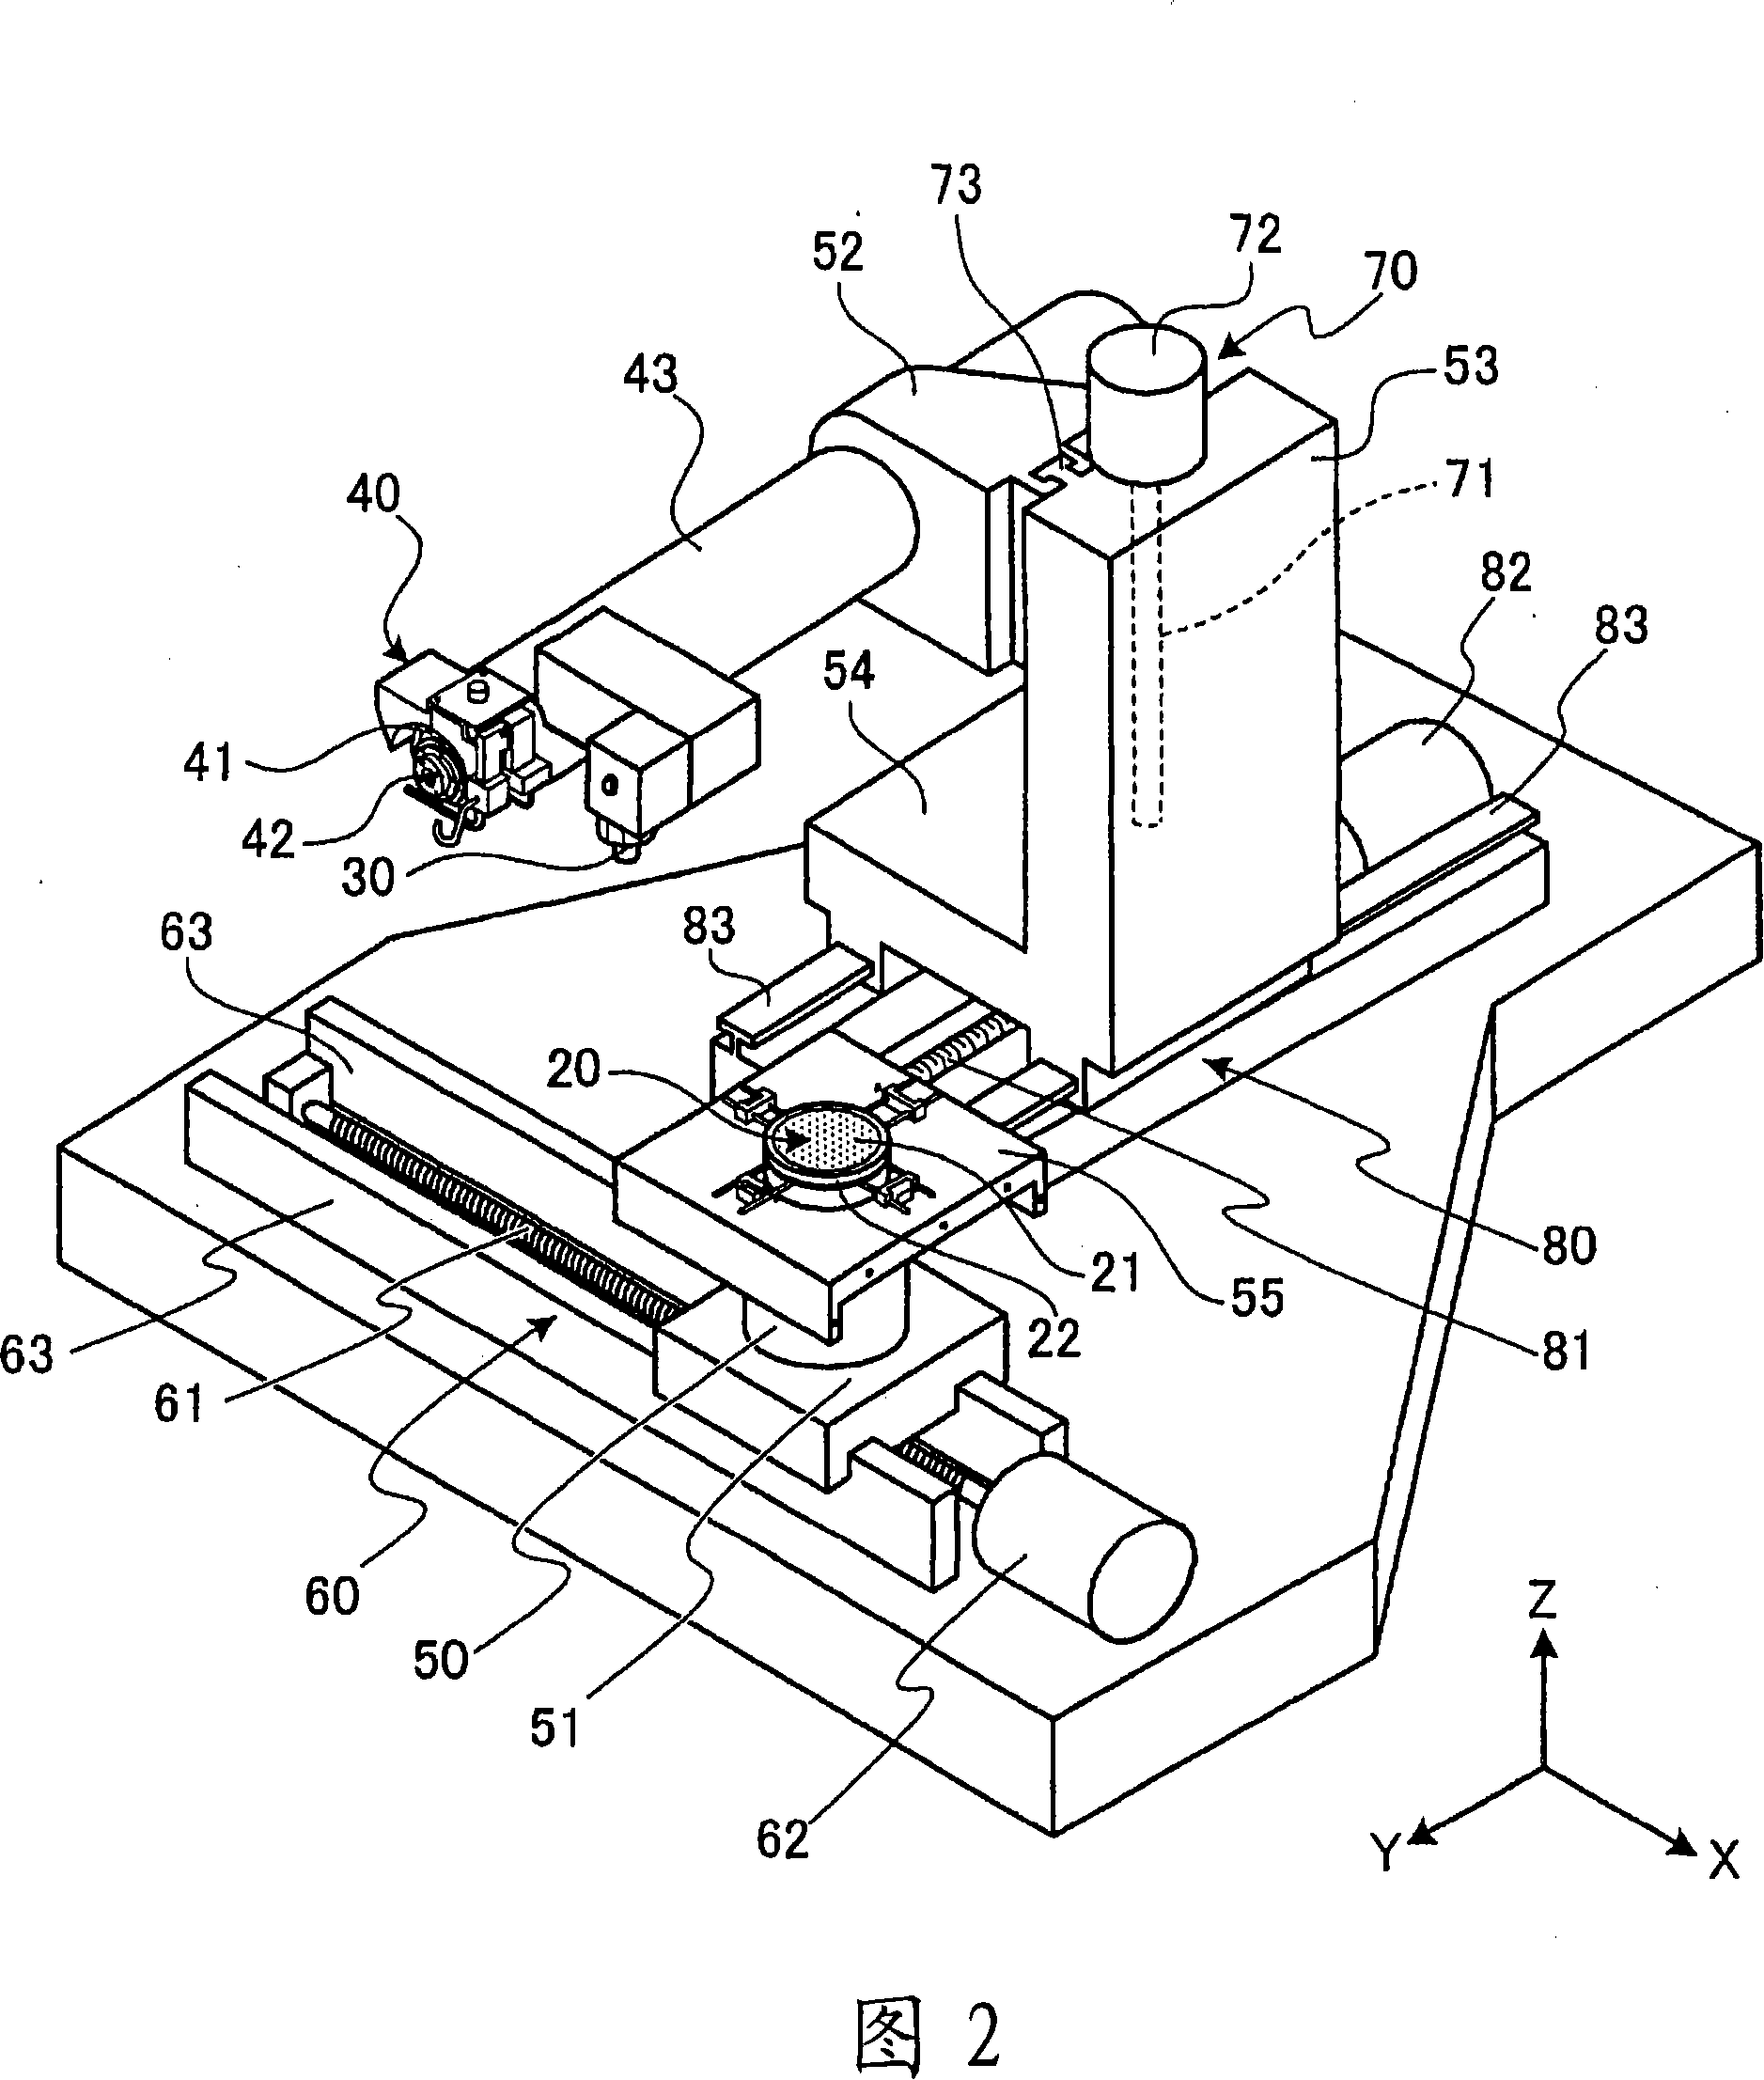 Processing device and suction plate bench